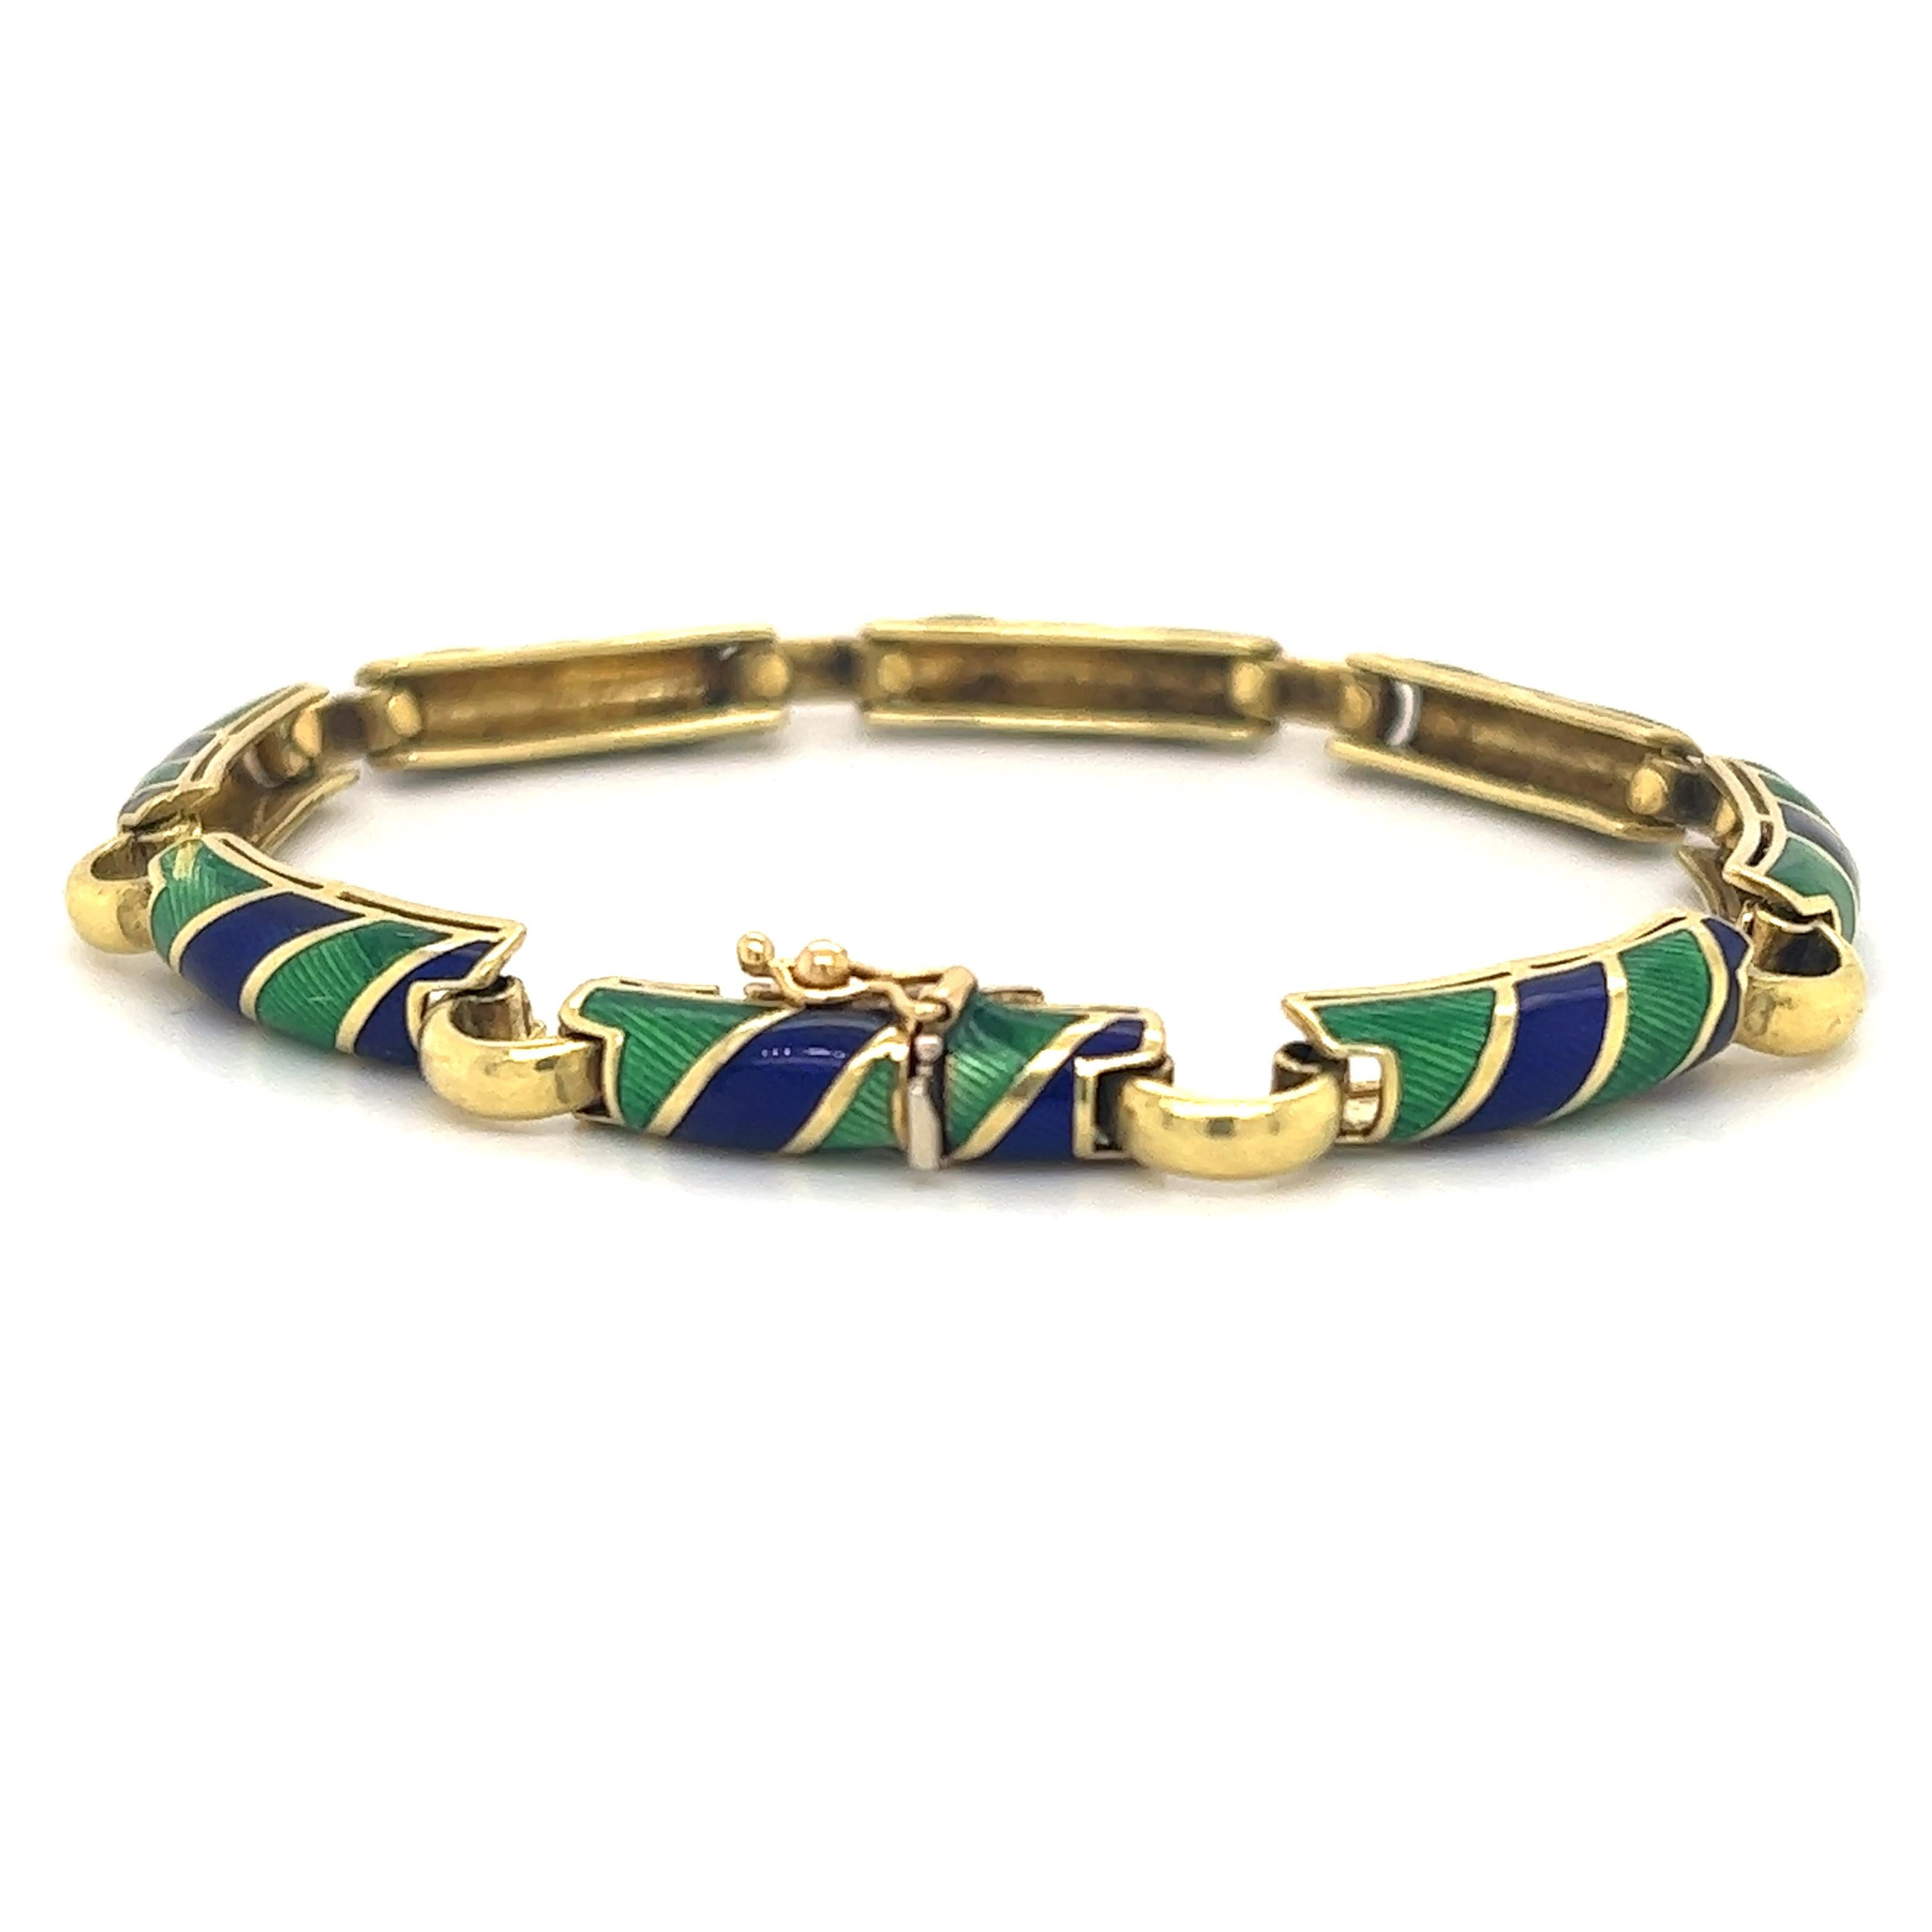 Beautiful bracelet crafted in 18k yellow gold. The bracelet is crafted by famed Italian designer Uno-A-Erre.  The bracelet is highlighted with guiloche enamel in green and blue.  The green and blue colors on this bracelet are vibrant and contrast